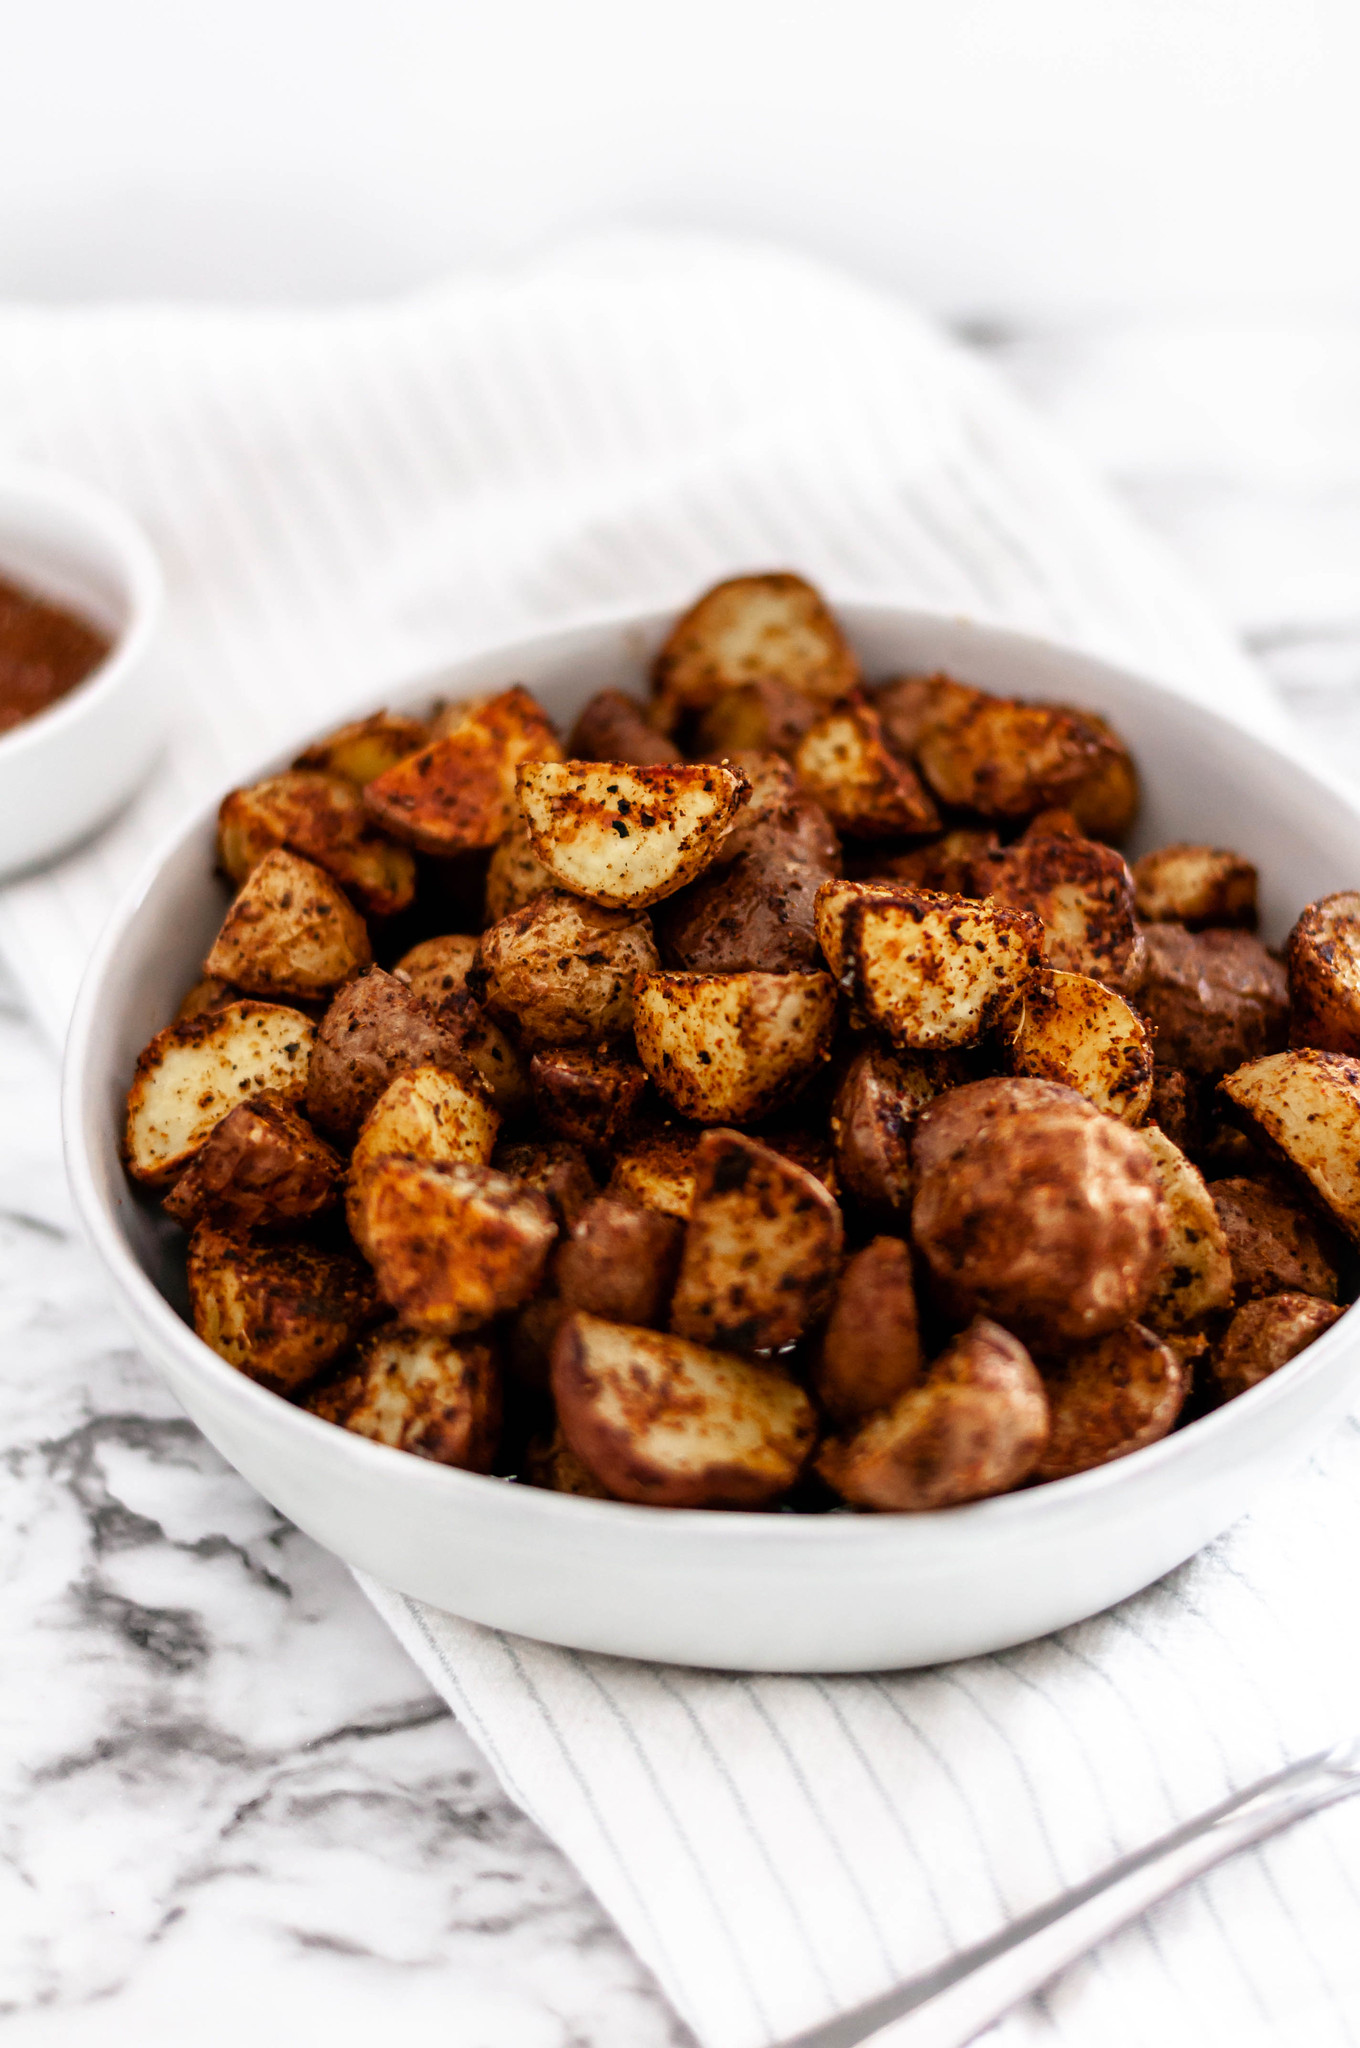 These Taco Roasted Potatoes are spiced up with your favorite taco spices. They make the perfect weeknight side dish, done in less than 30 minutes.